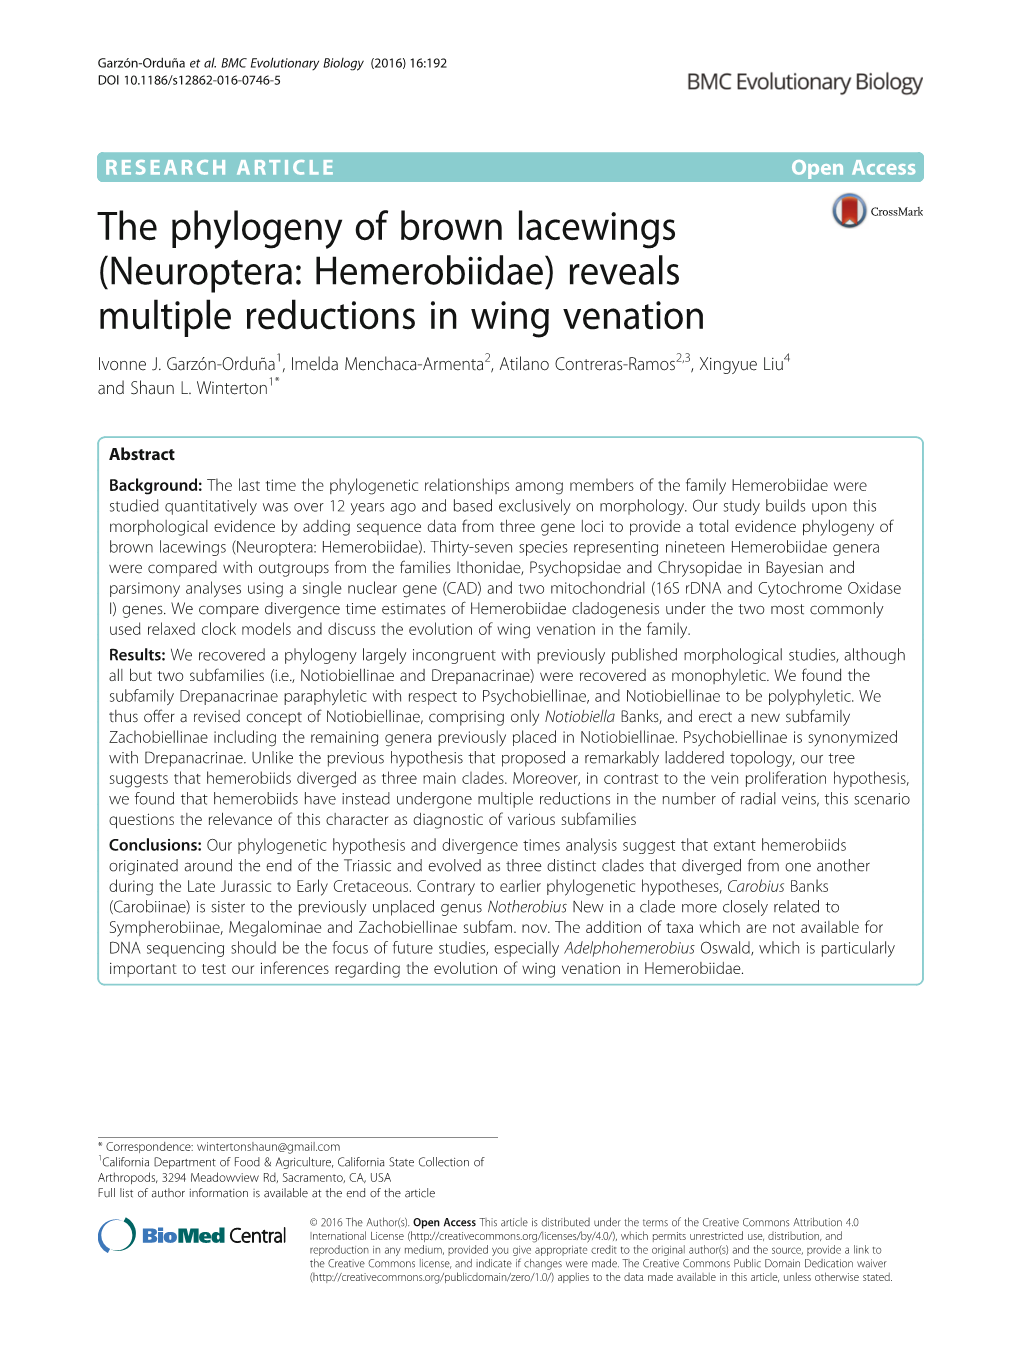 The Phylogeny of Brown Lacewings (Neuroptera: Hemerobiidae) Reveals Multiple Reductions in Wing Venation Ivonne J